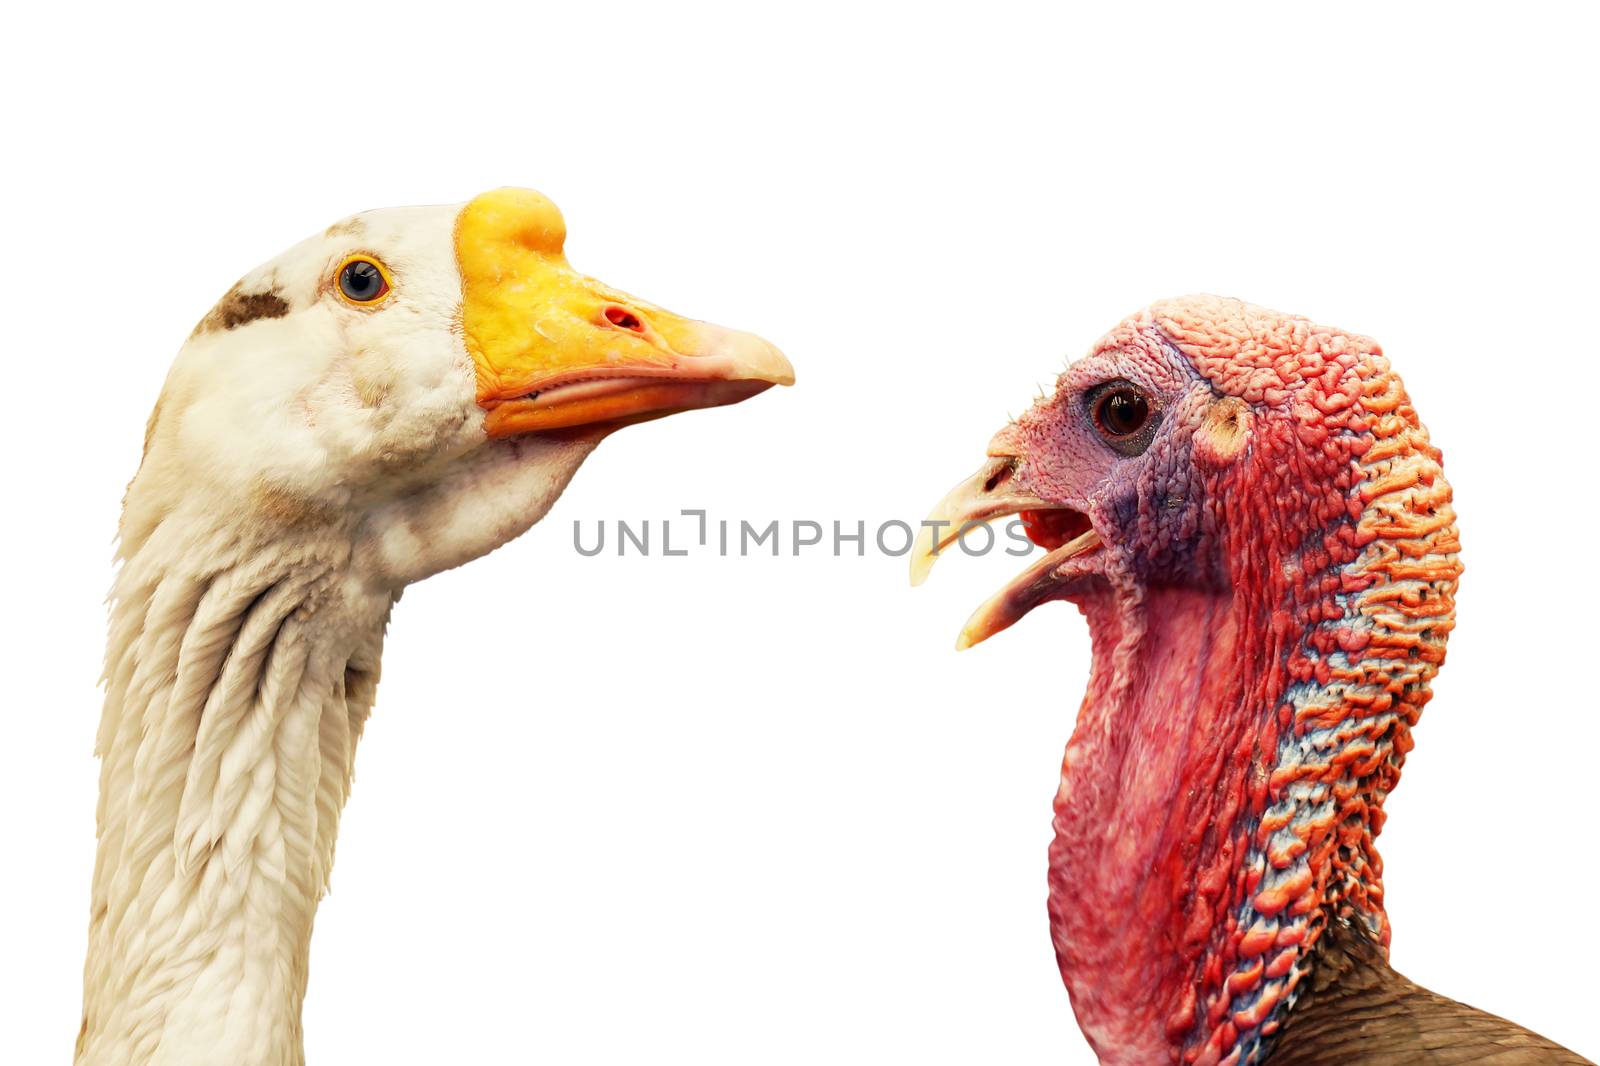 Goose and wild turkey portraits on white by Mirage3